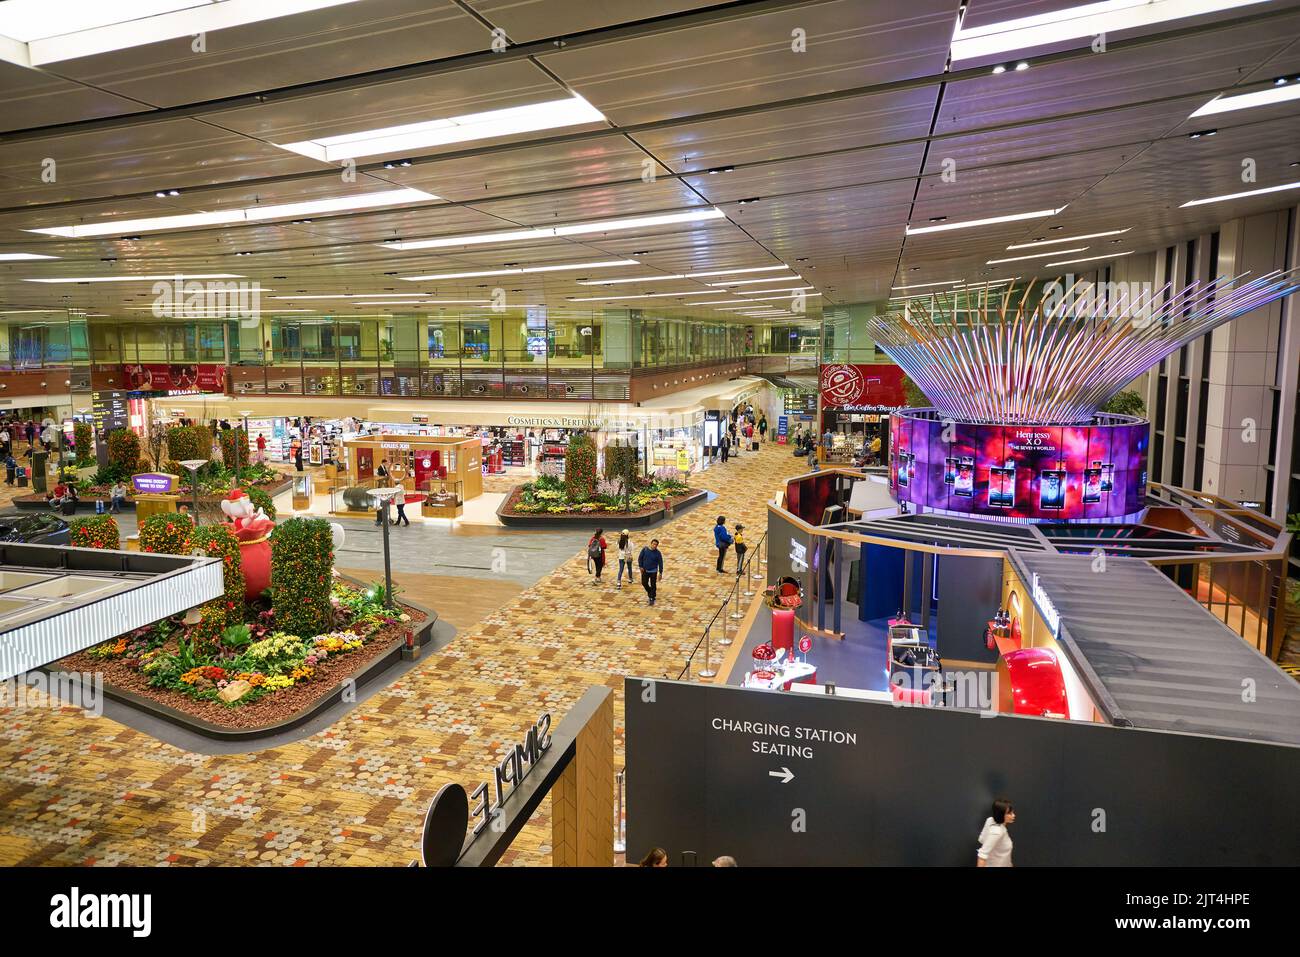 Changi Airport - Discover CHANEL's new pop-up store at T3